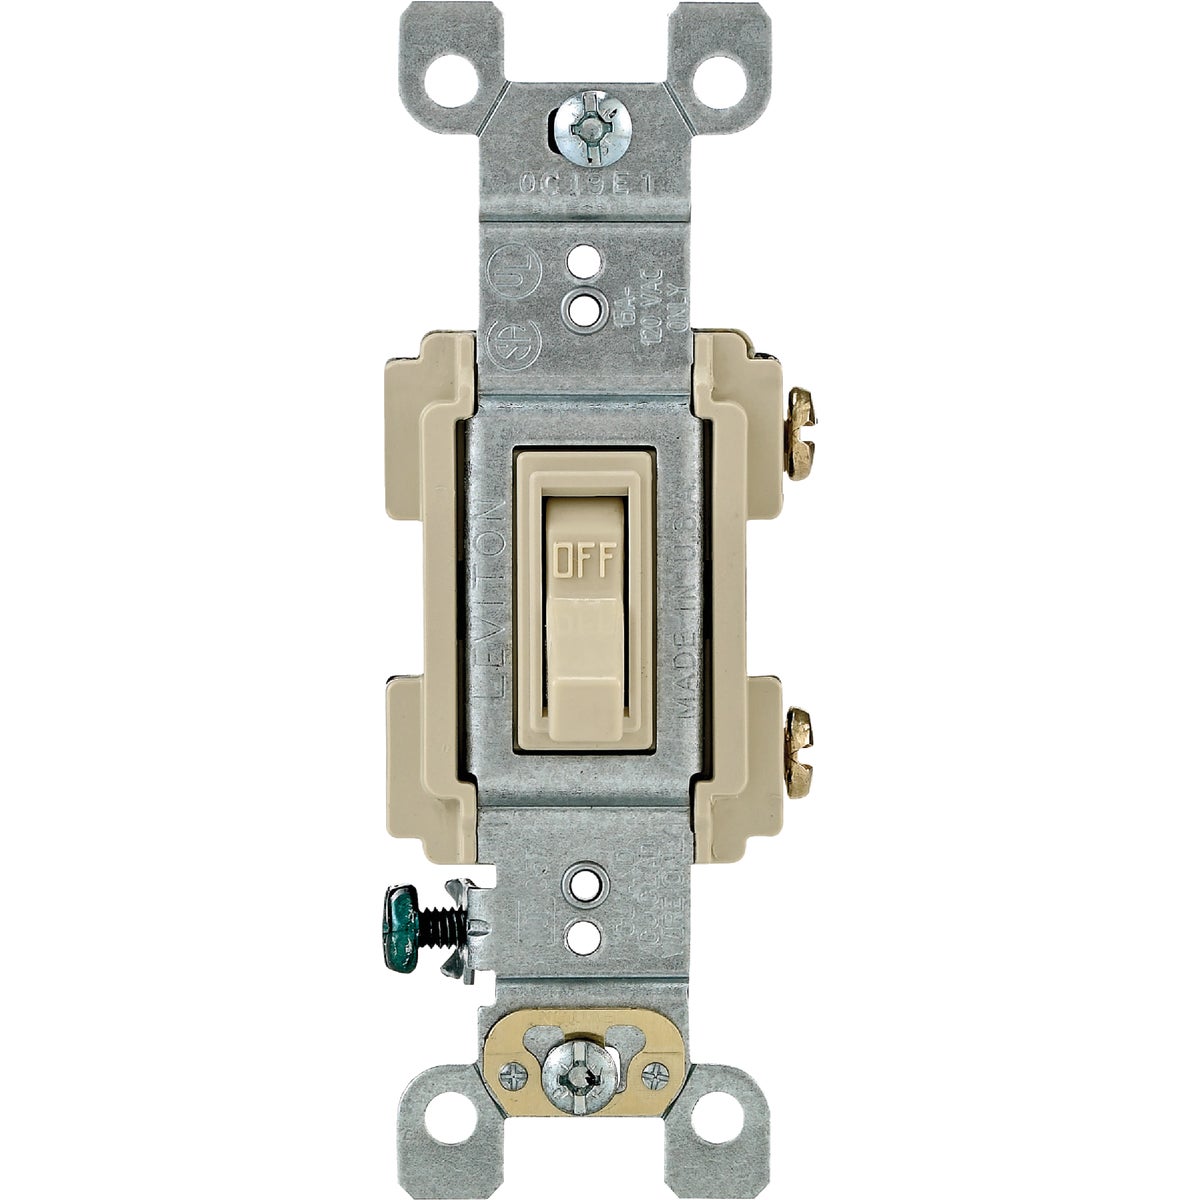 Item 501305, Single pole switch ideal for controlling one fixture from a single location